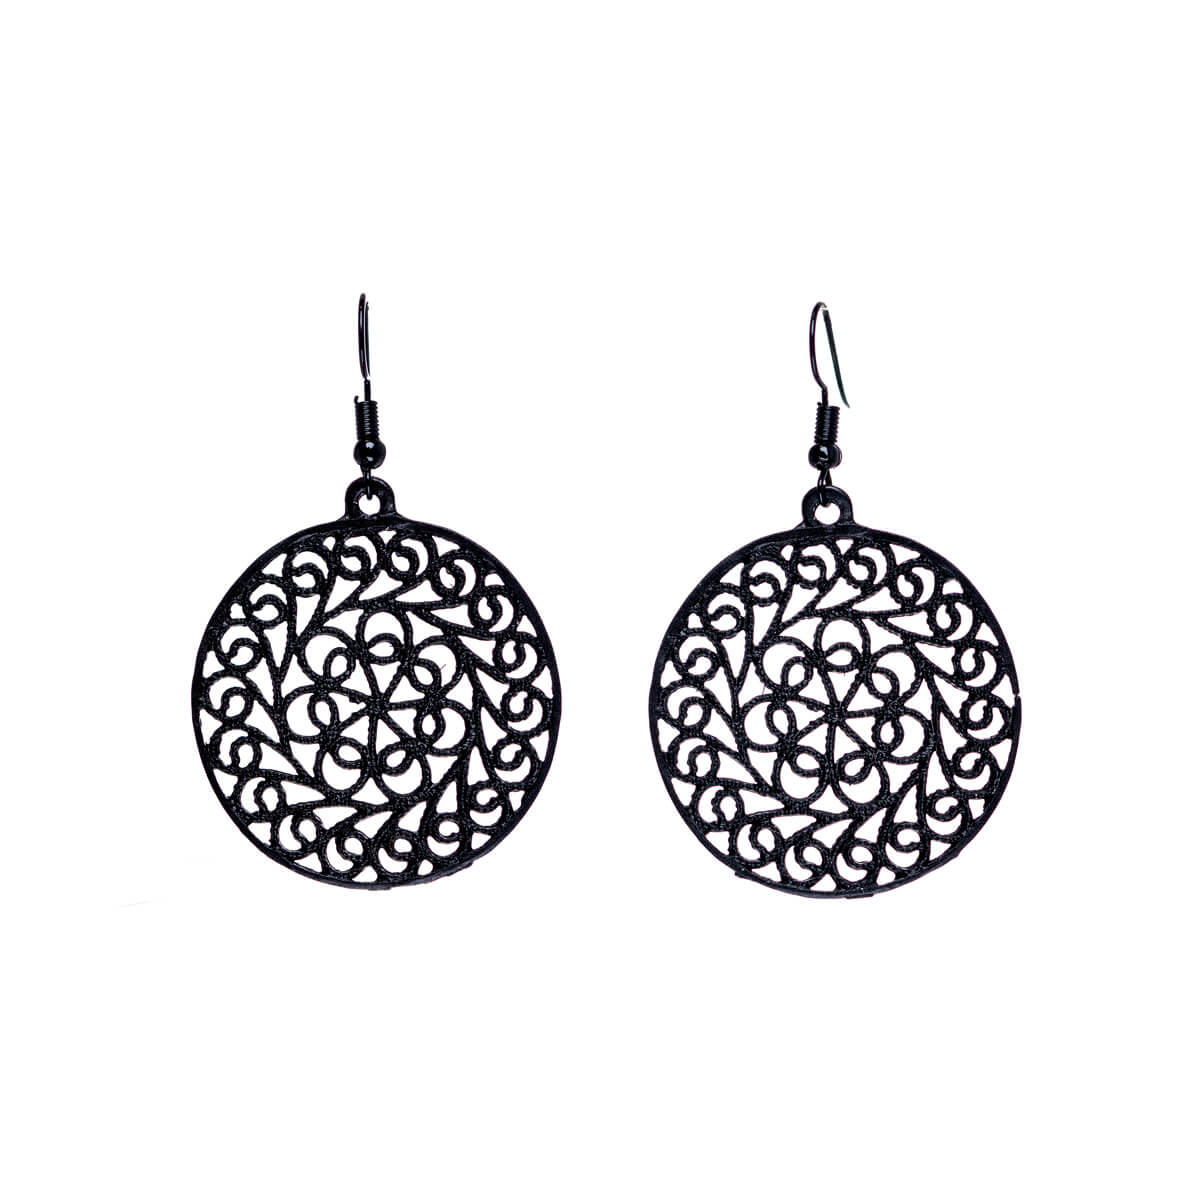 Textured hanging round earrings